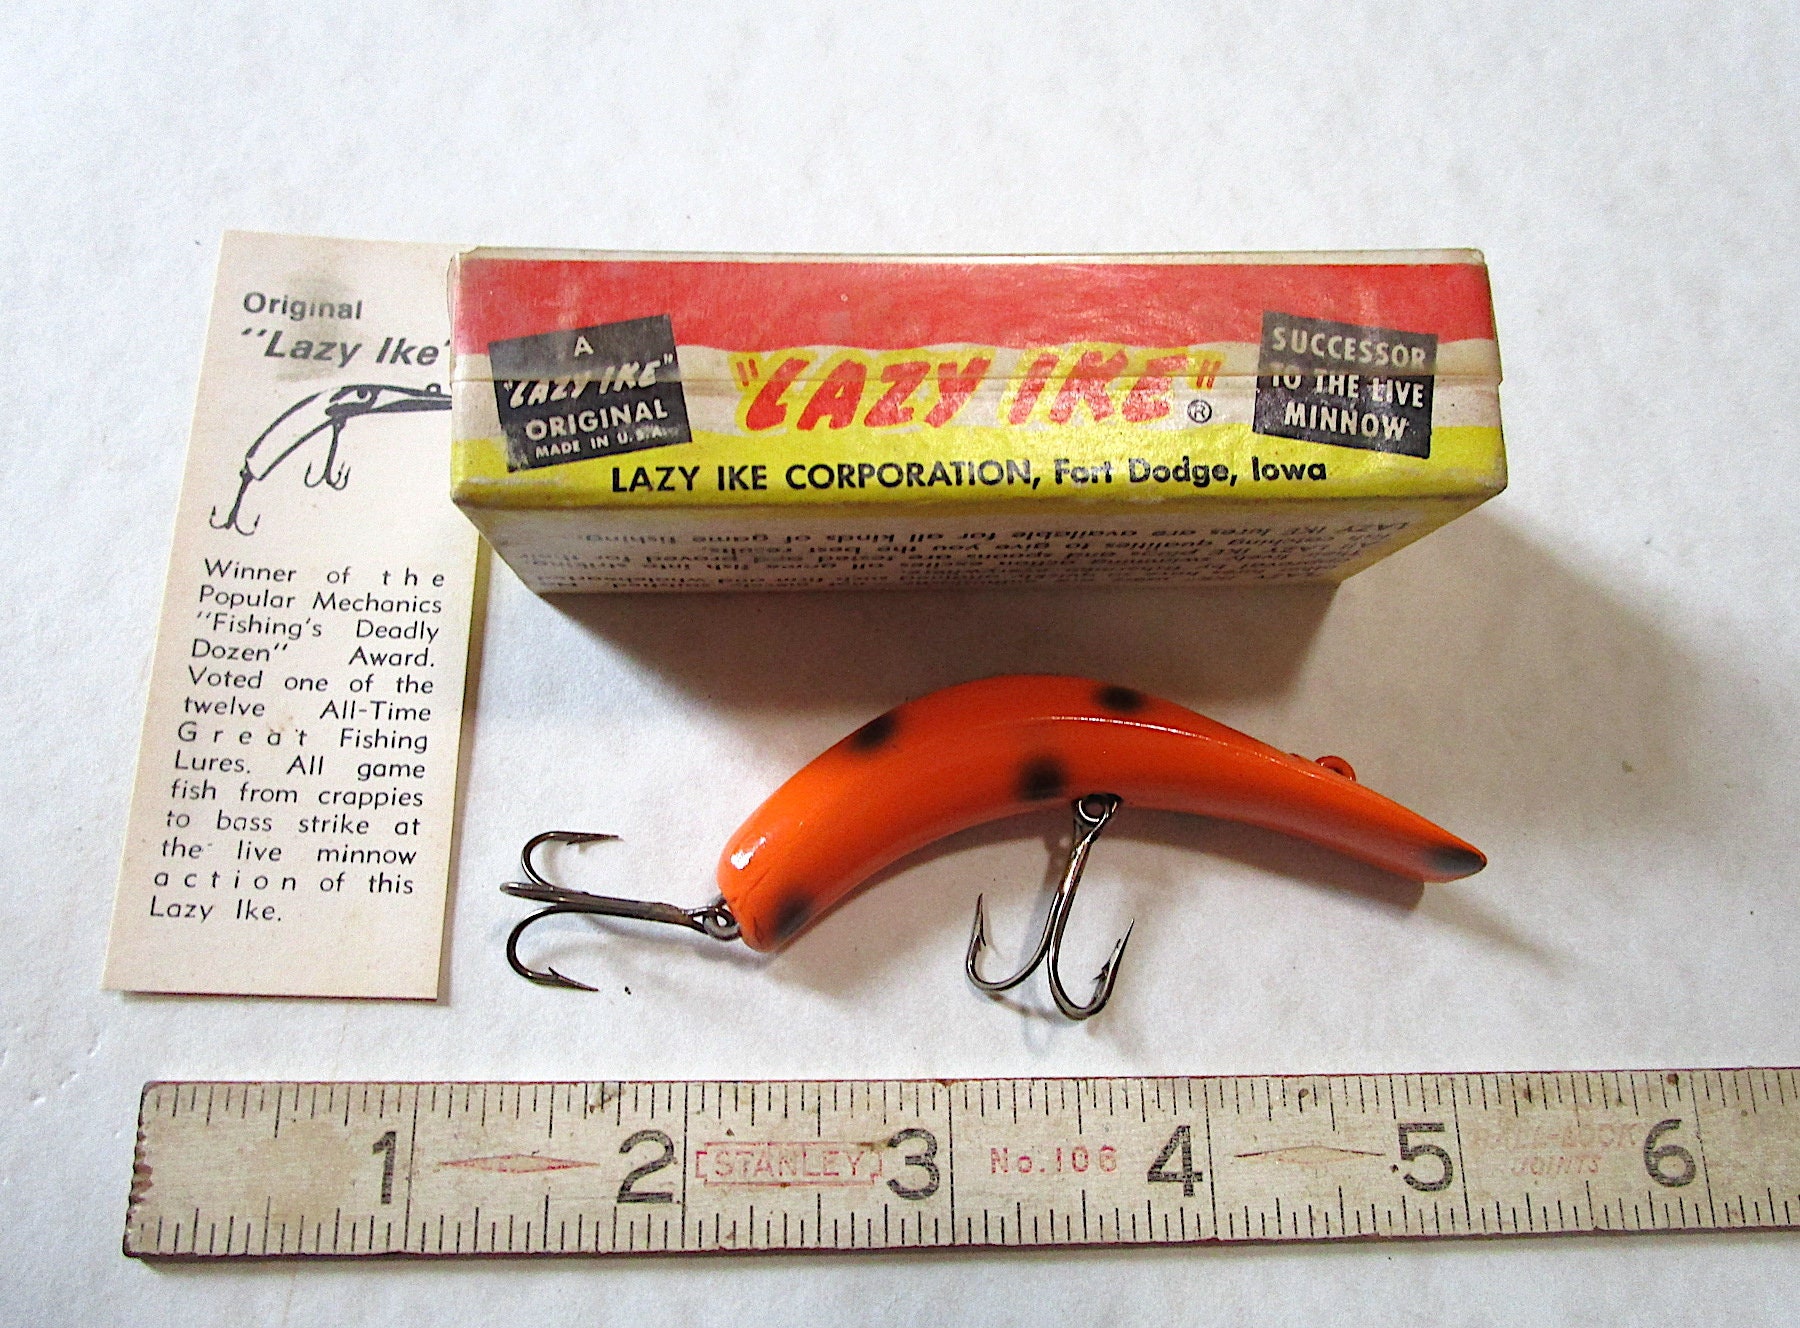 BR135 Like New In Box! Lazy Ike old vintage fishing lure! Good color!  Perfect package!